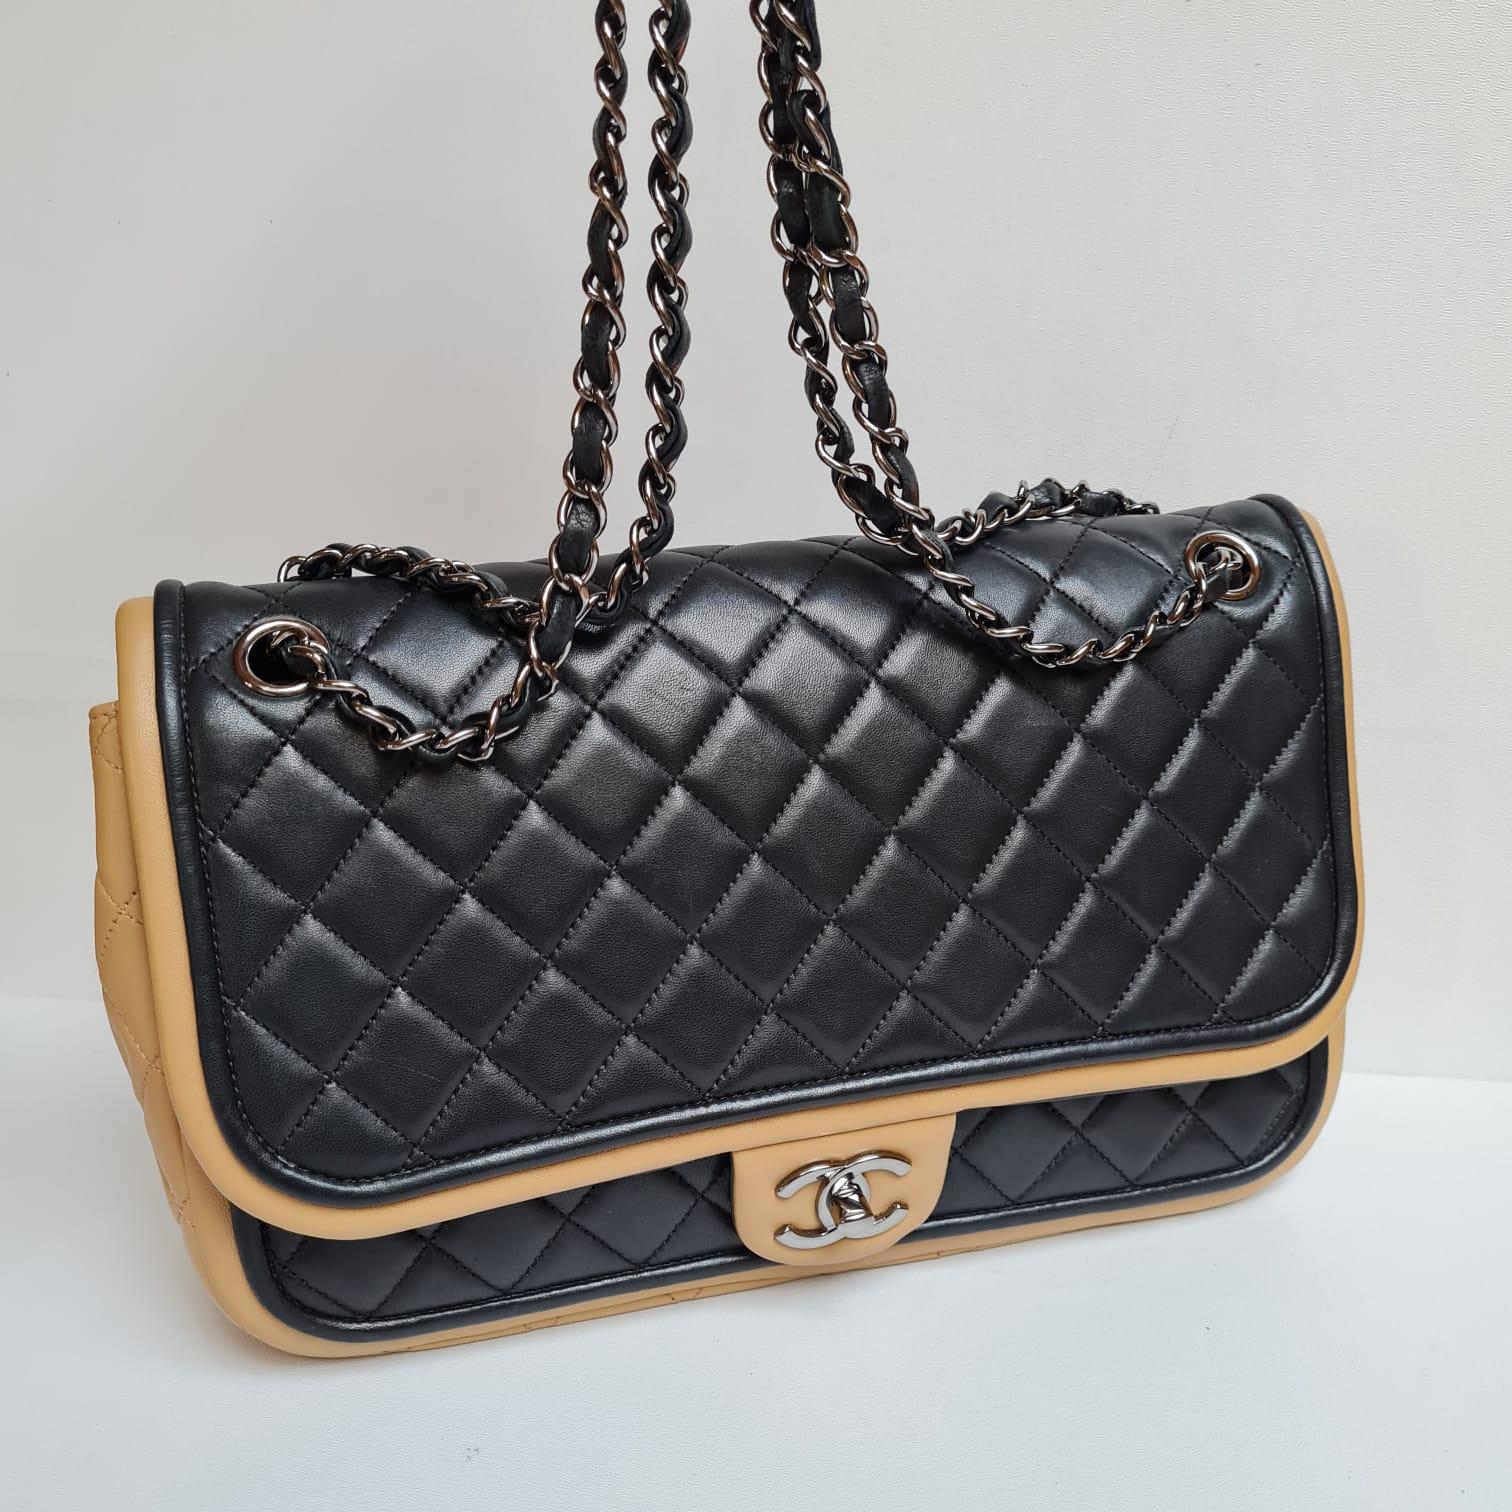 Chanel Black and Beige Lambskin Quilted Twist Two Tone Jumbo Single Flap Bag In Good Condition For Sale In Jakarta, Daerah Khusus Ibukota Jakarta